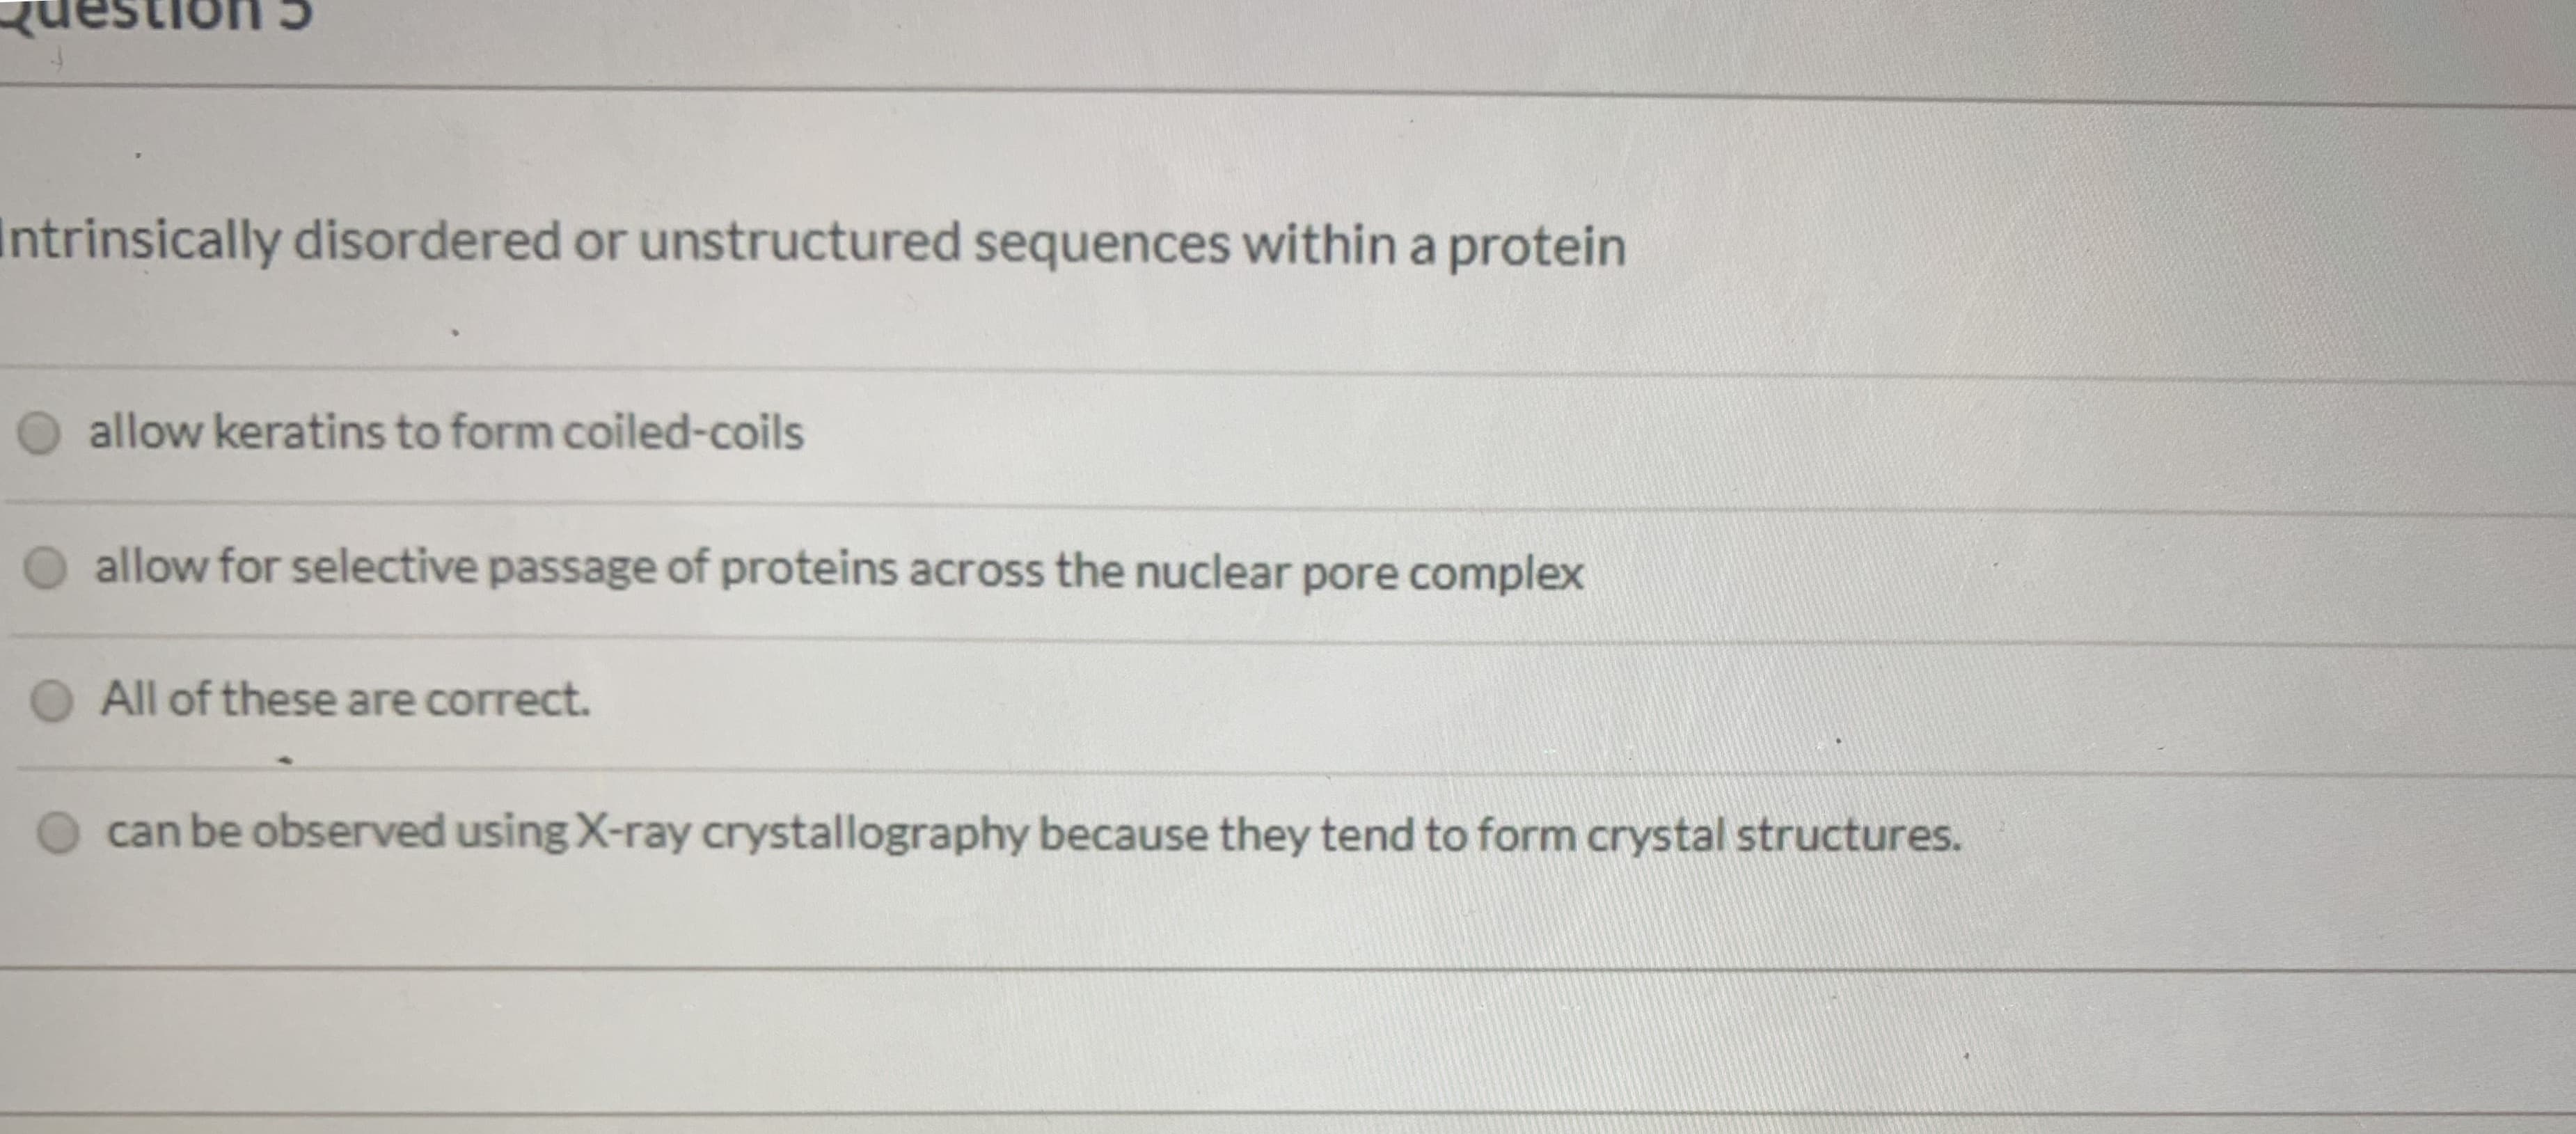 htrinsically disordered or unstructured sequences within a protein
O allow keratins to form coiled-coils
O allow for selective passage of proteins across the nuclear pore complex
O All of these are correct.
can be observed using X-ray crystallography because they tend to form crystal structures.
